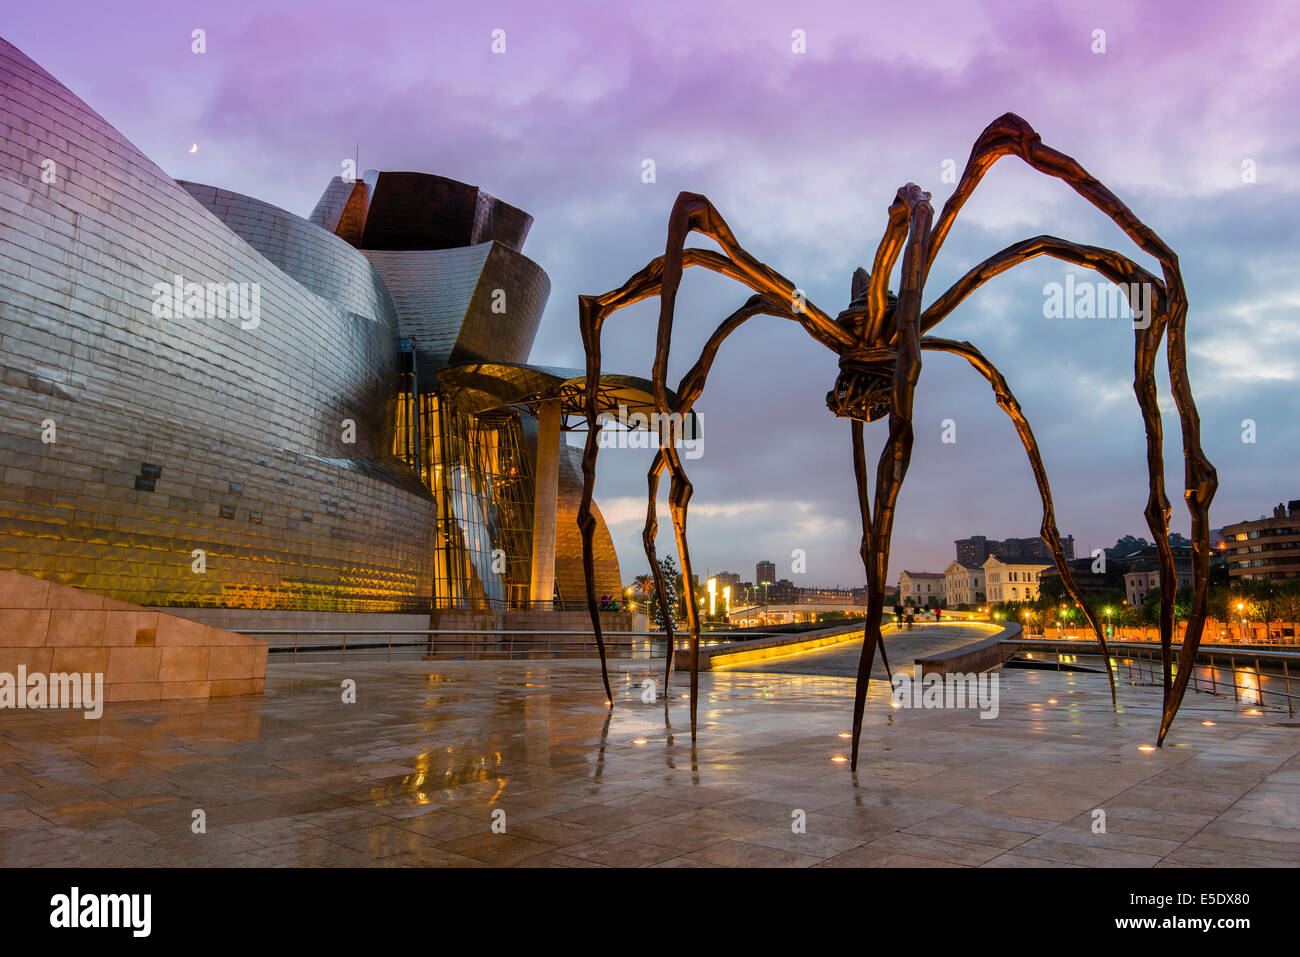 ArtDependence  Louise Bourgeois' Monumental 'Spider' to Make Auction Debut  at Sotheby's this May